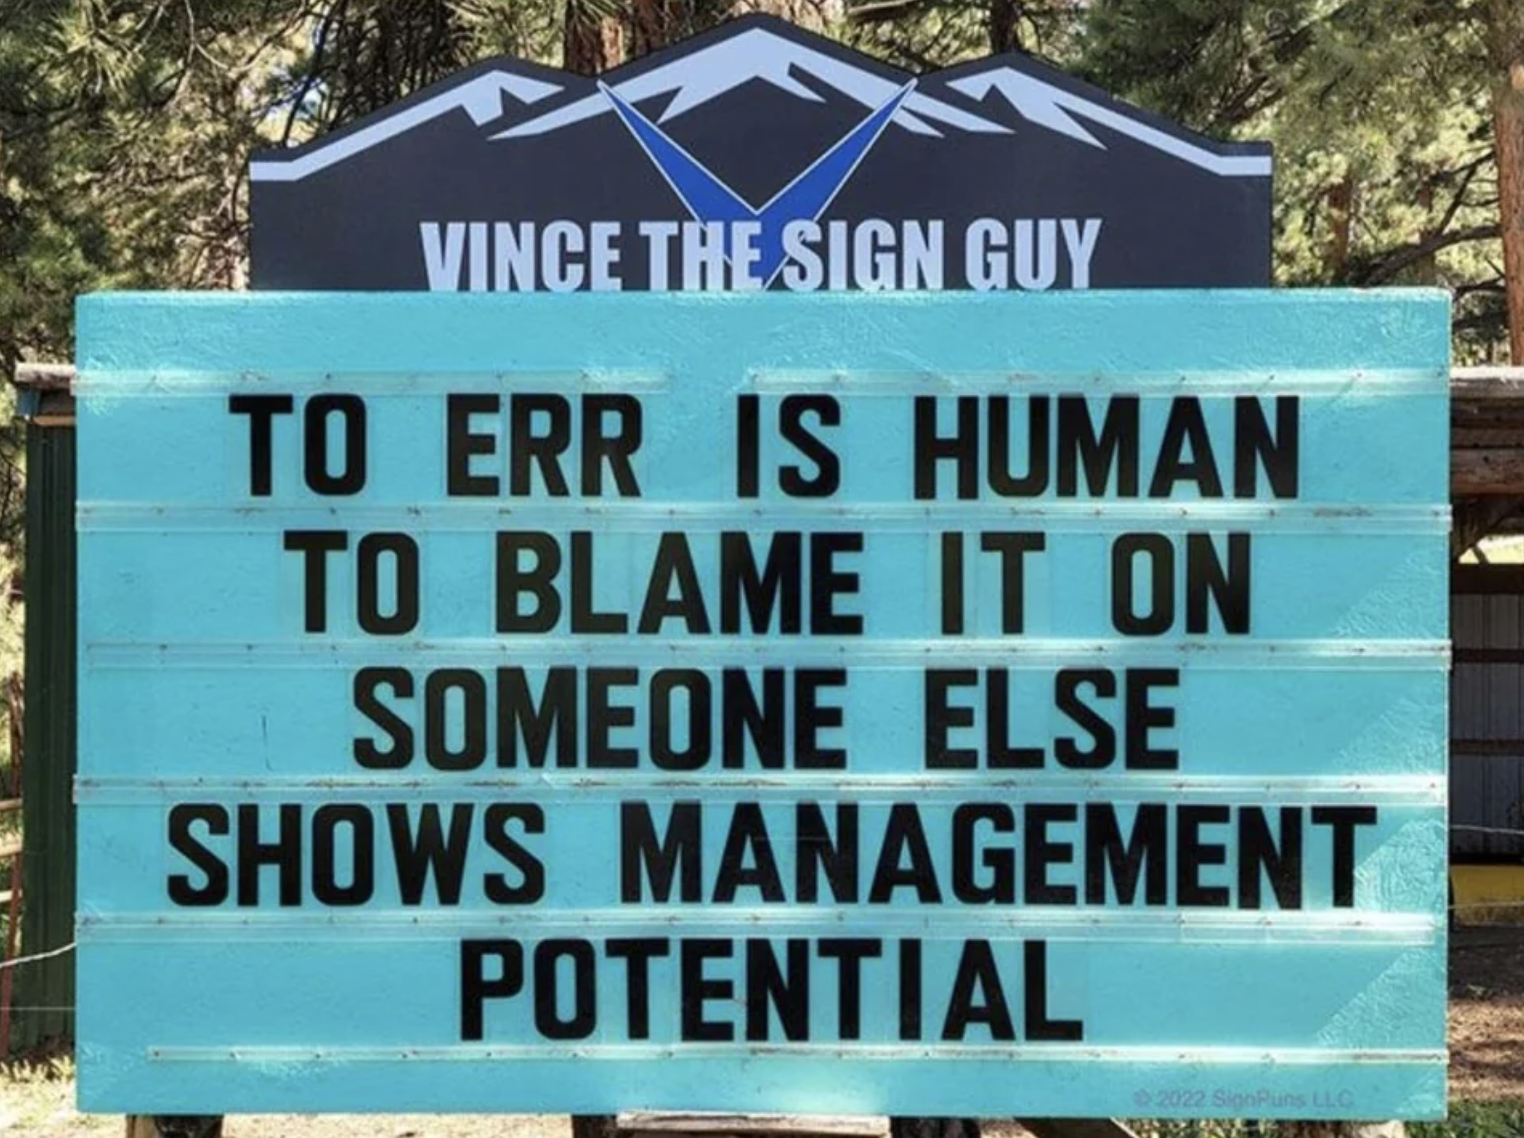 The sign says &quot;to err is human, to blame it on someone else shows management potential&quot;